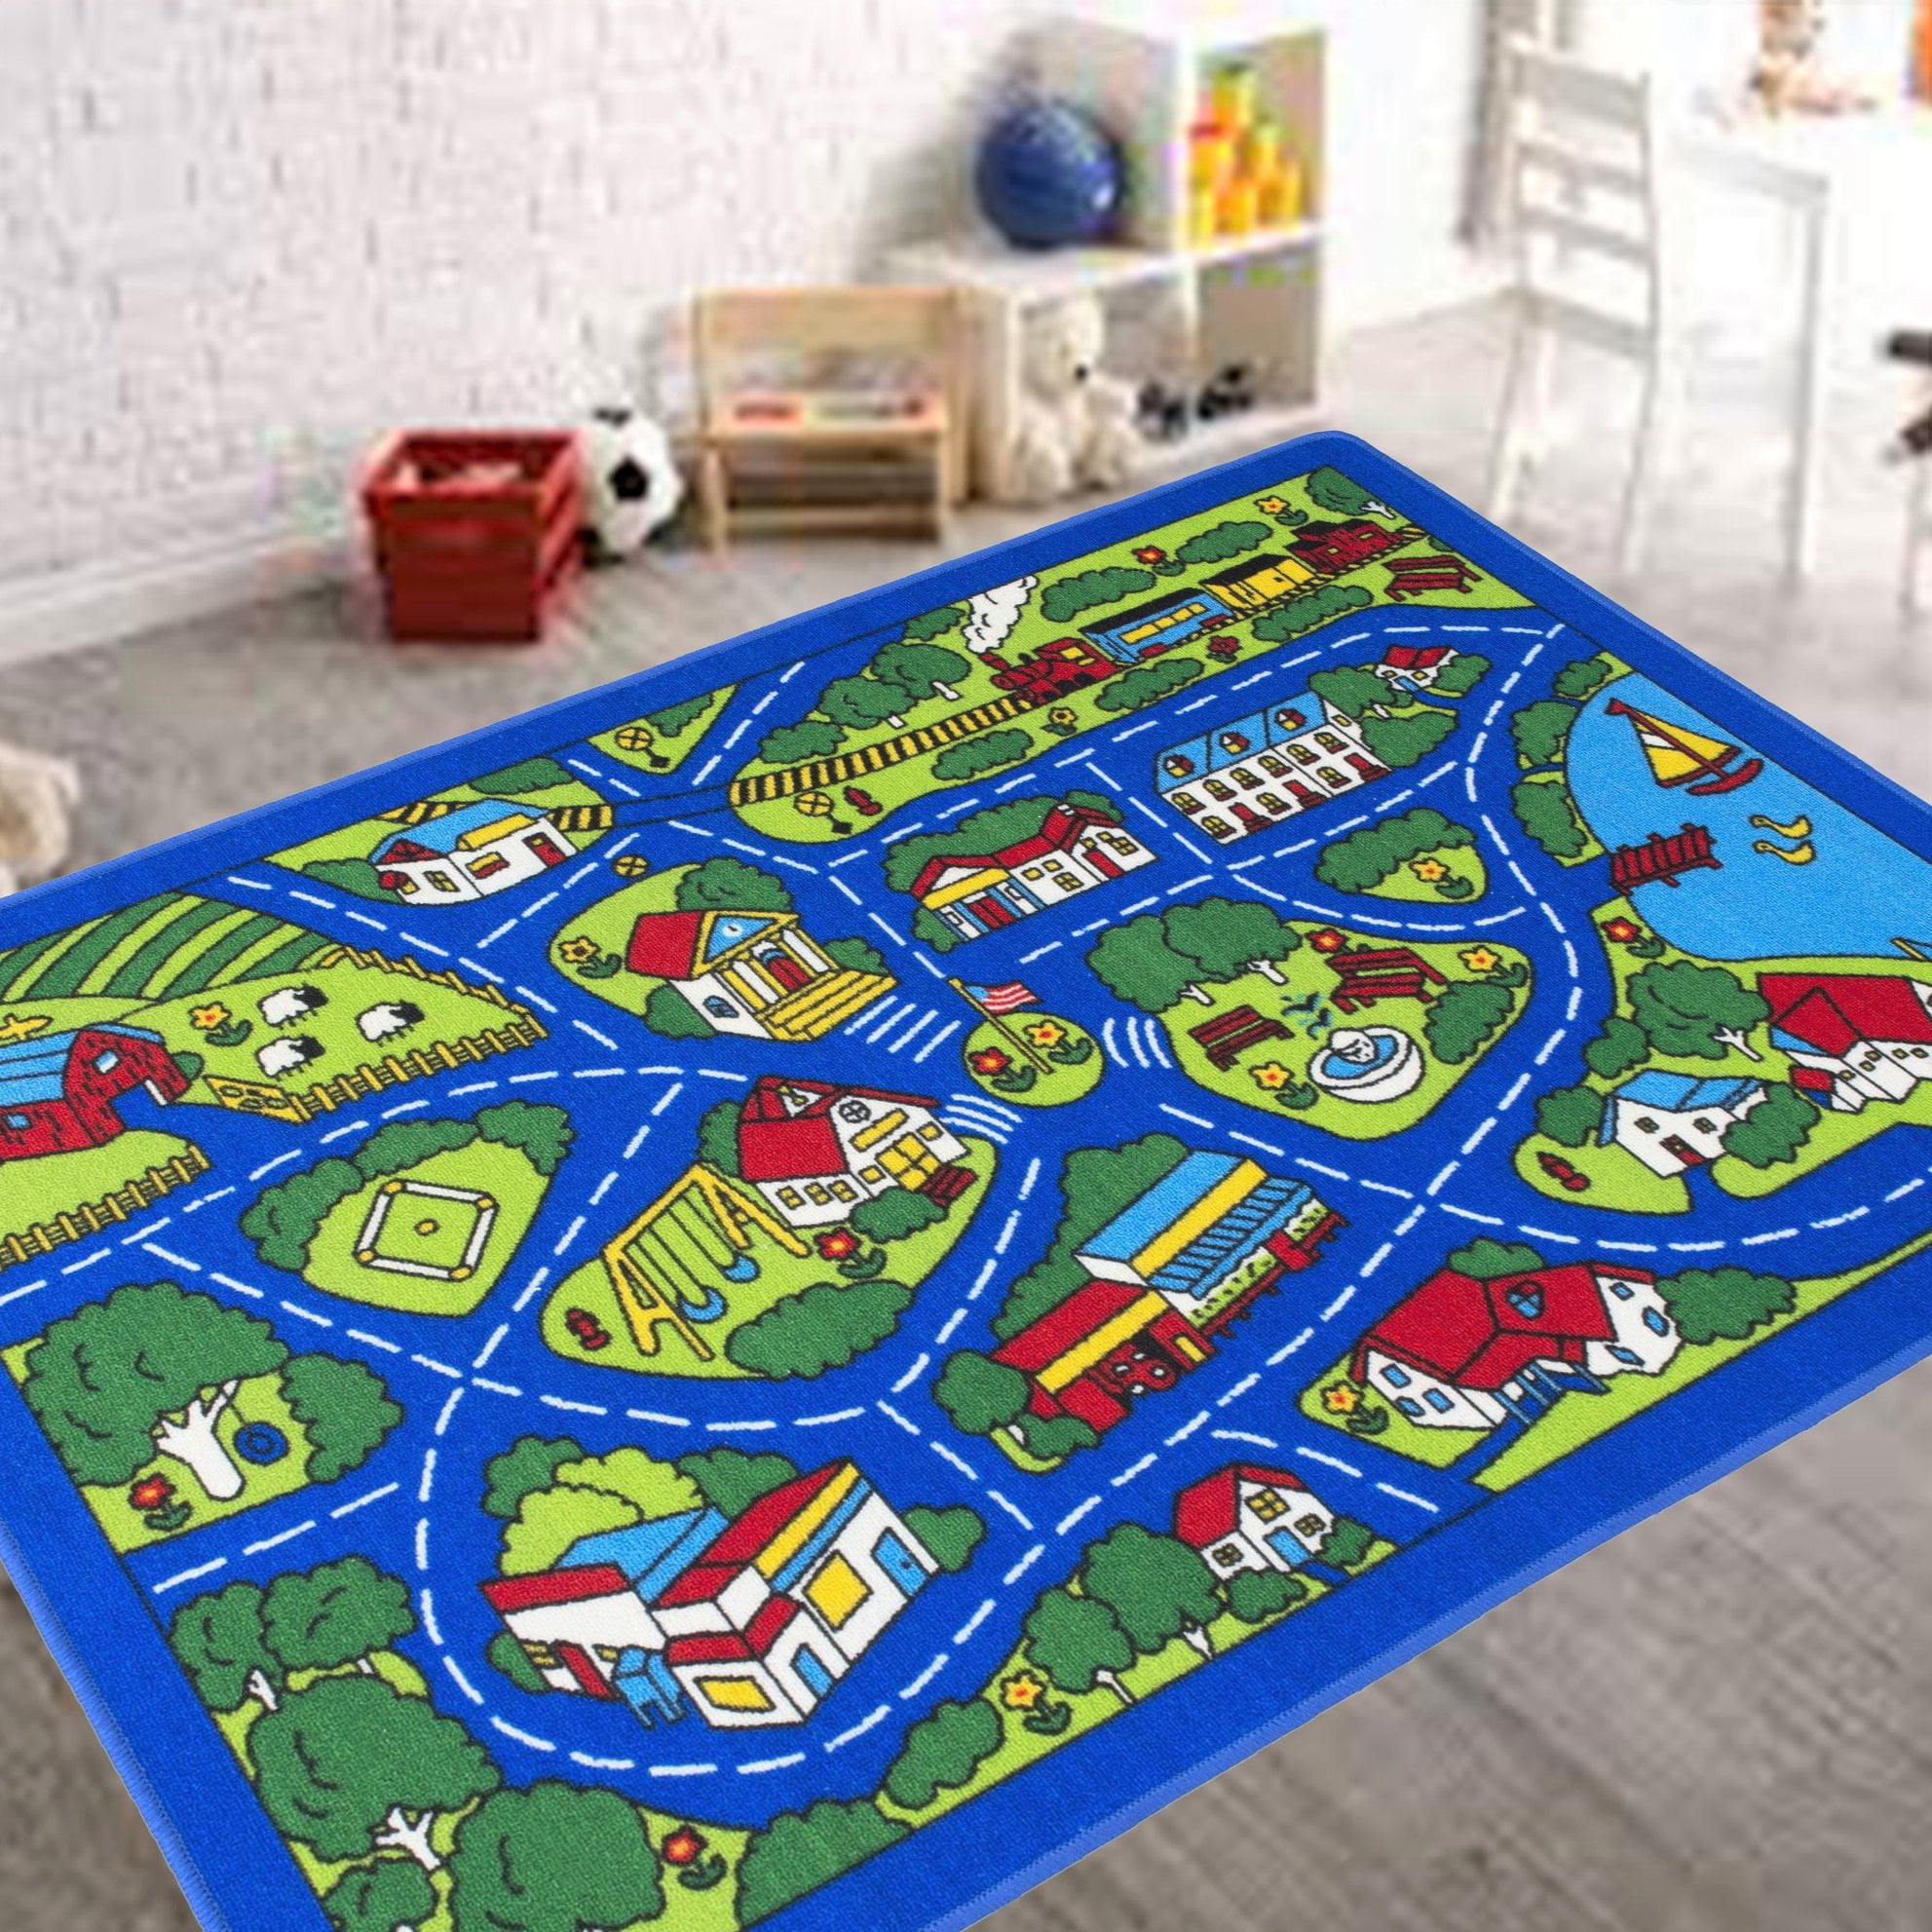 Kids Car Road Rugs City Map Play mat for Classroom/Baby Room Non-Slip Rubber Rug 